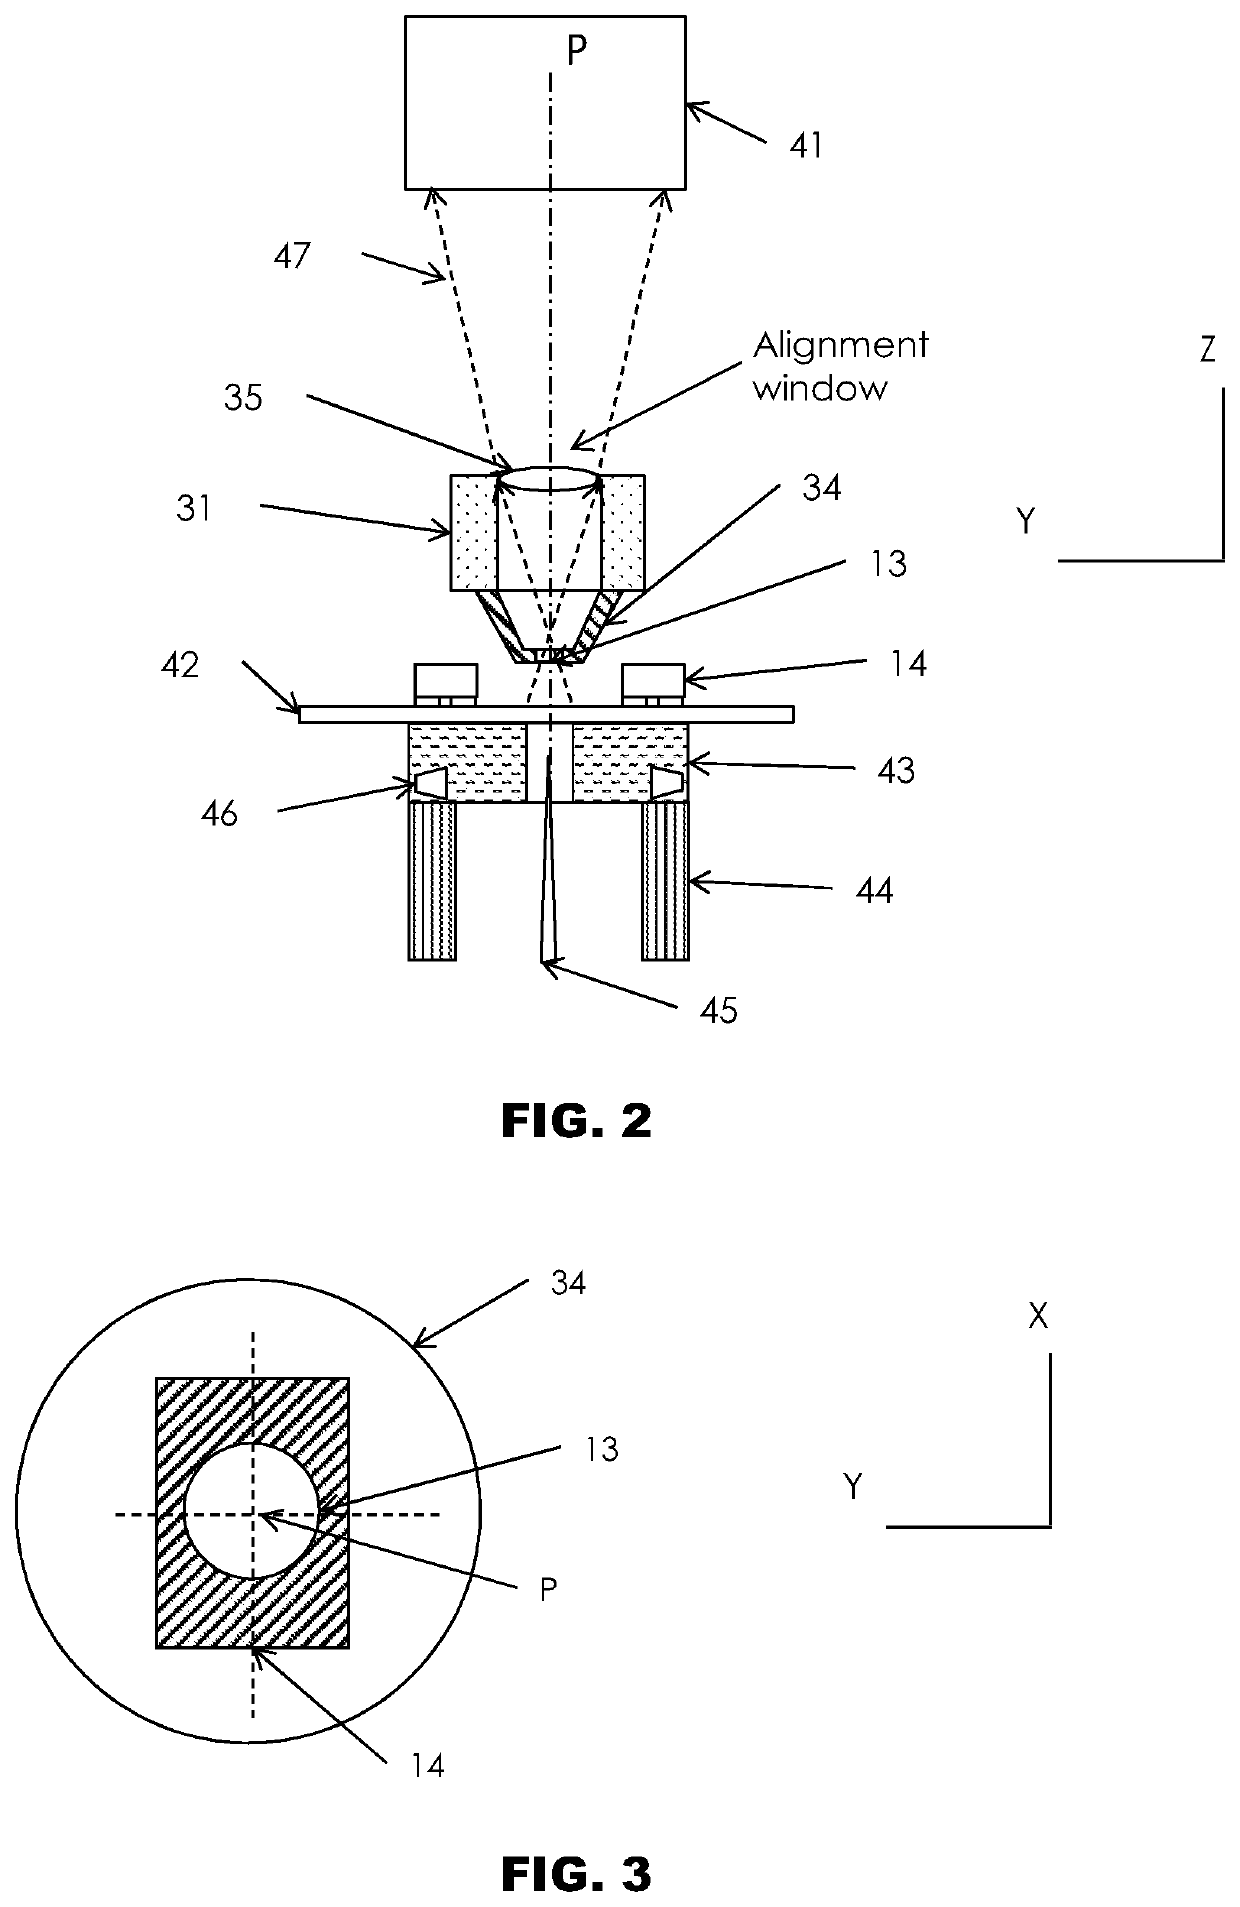 Collet inspection in a semiconductor pick and place apparatus